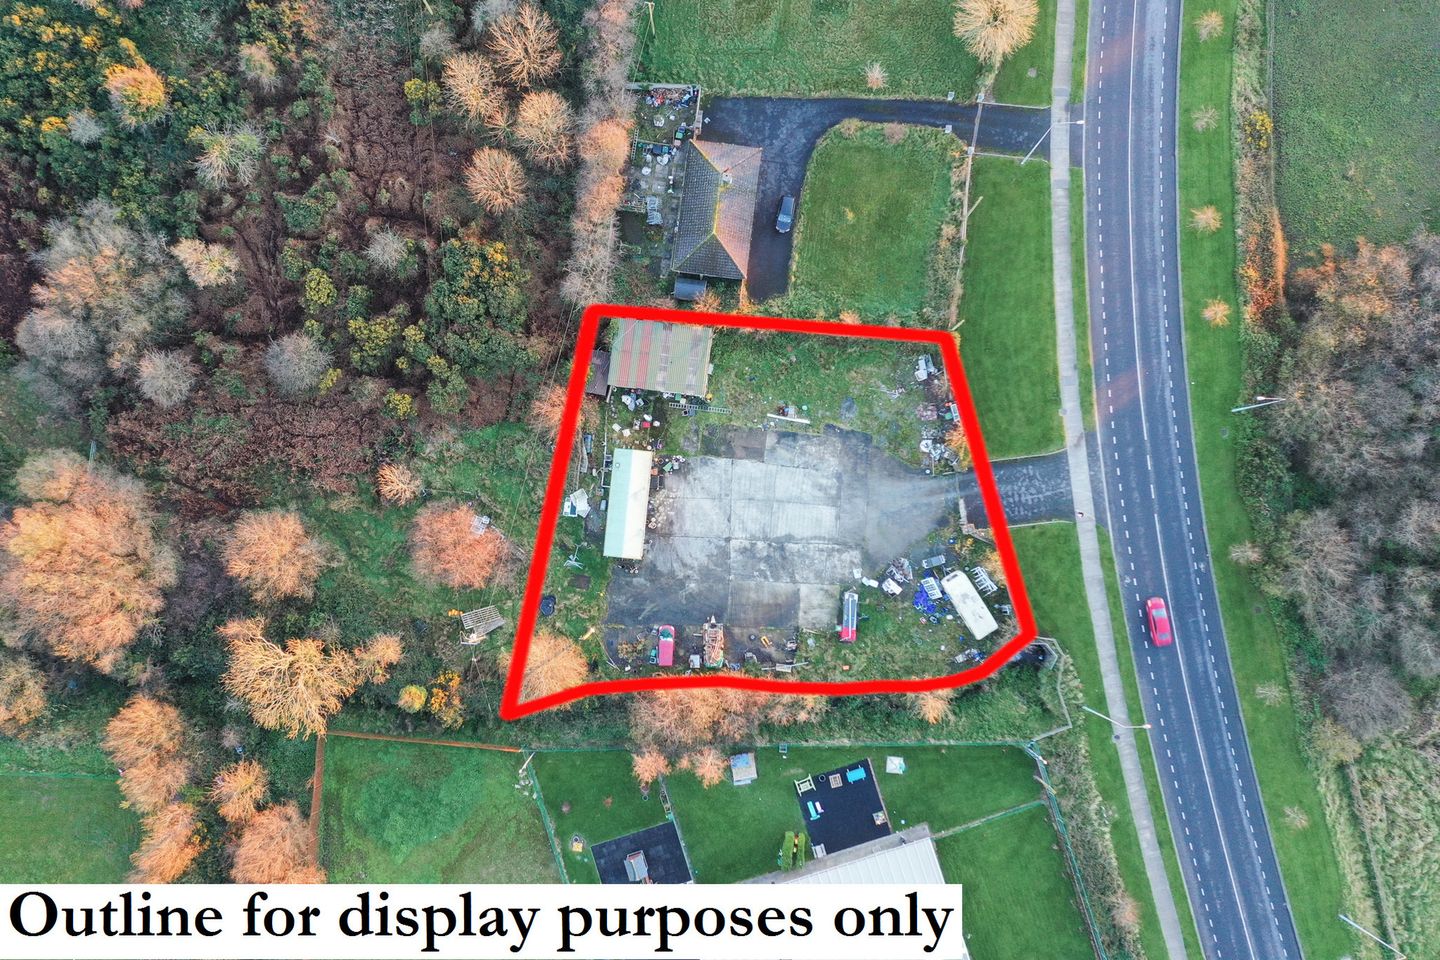 0.37 Acre Site At Couse, Kilcohan, Old Tramore Road, Waterford, X91F6DX